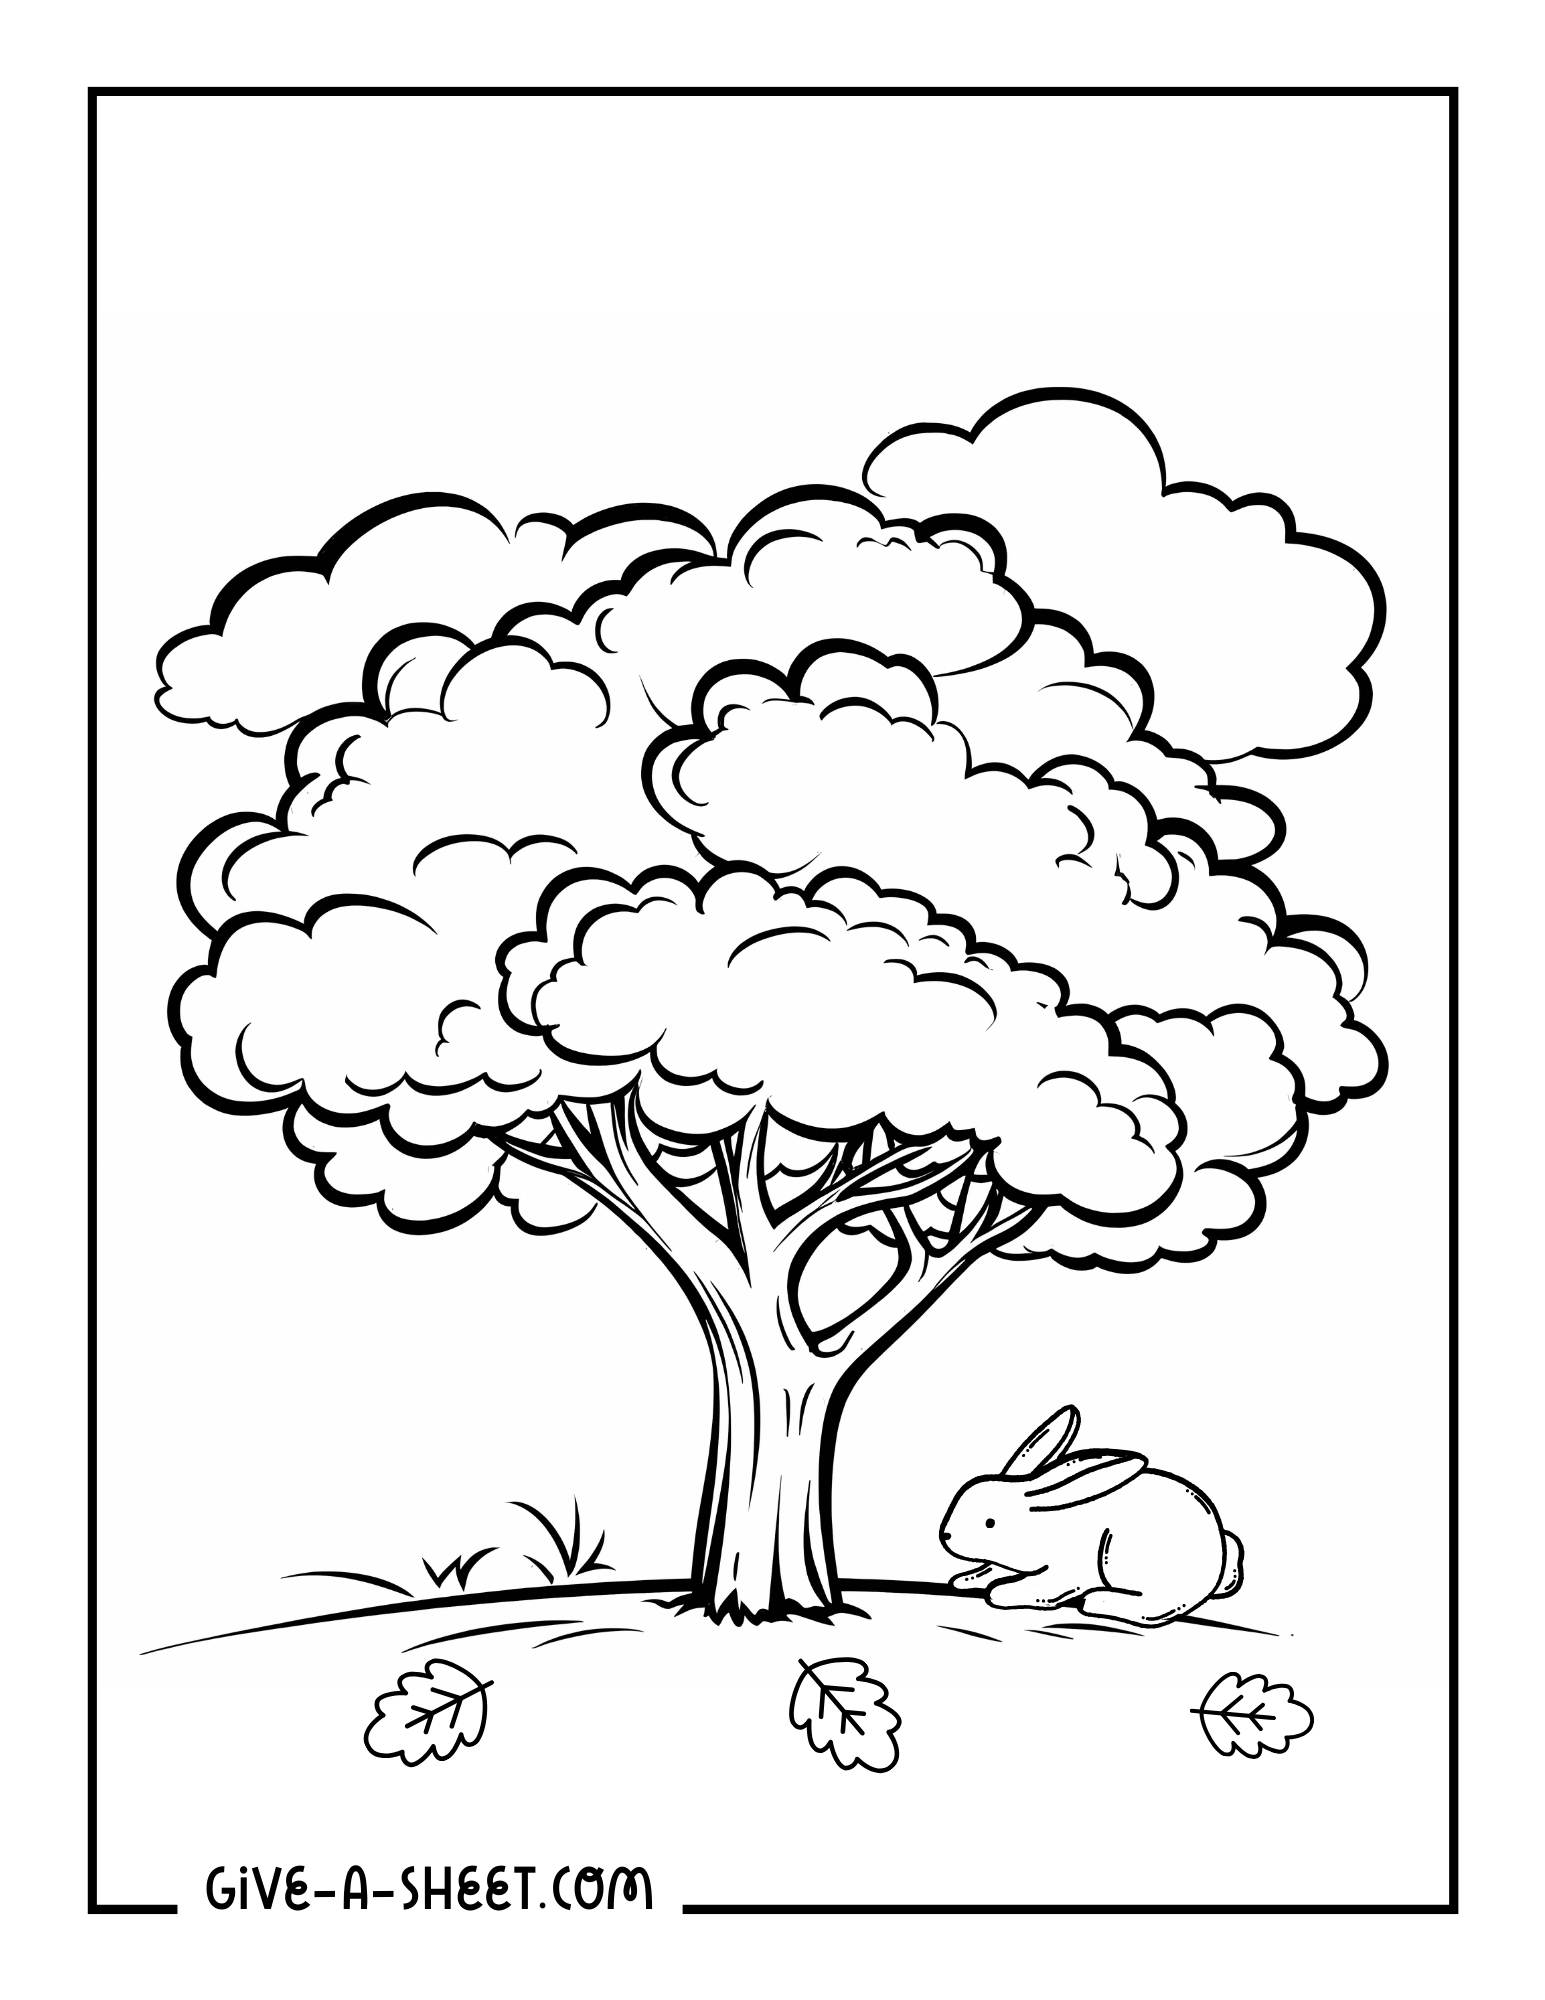 Big oak tree coloring page with a rabbit.